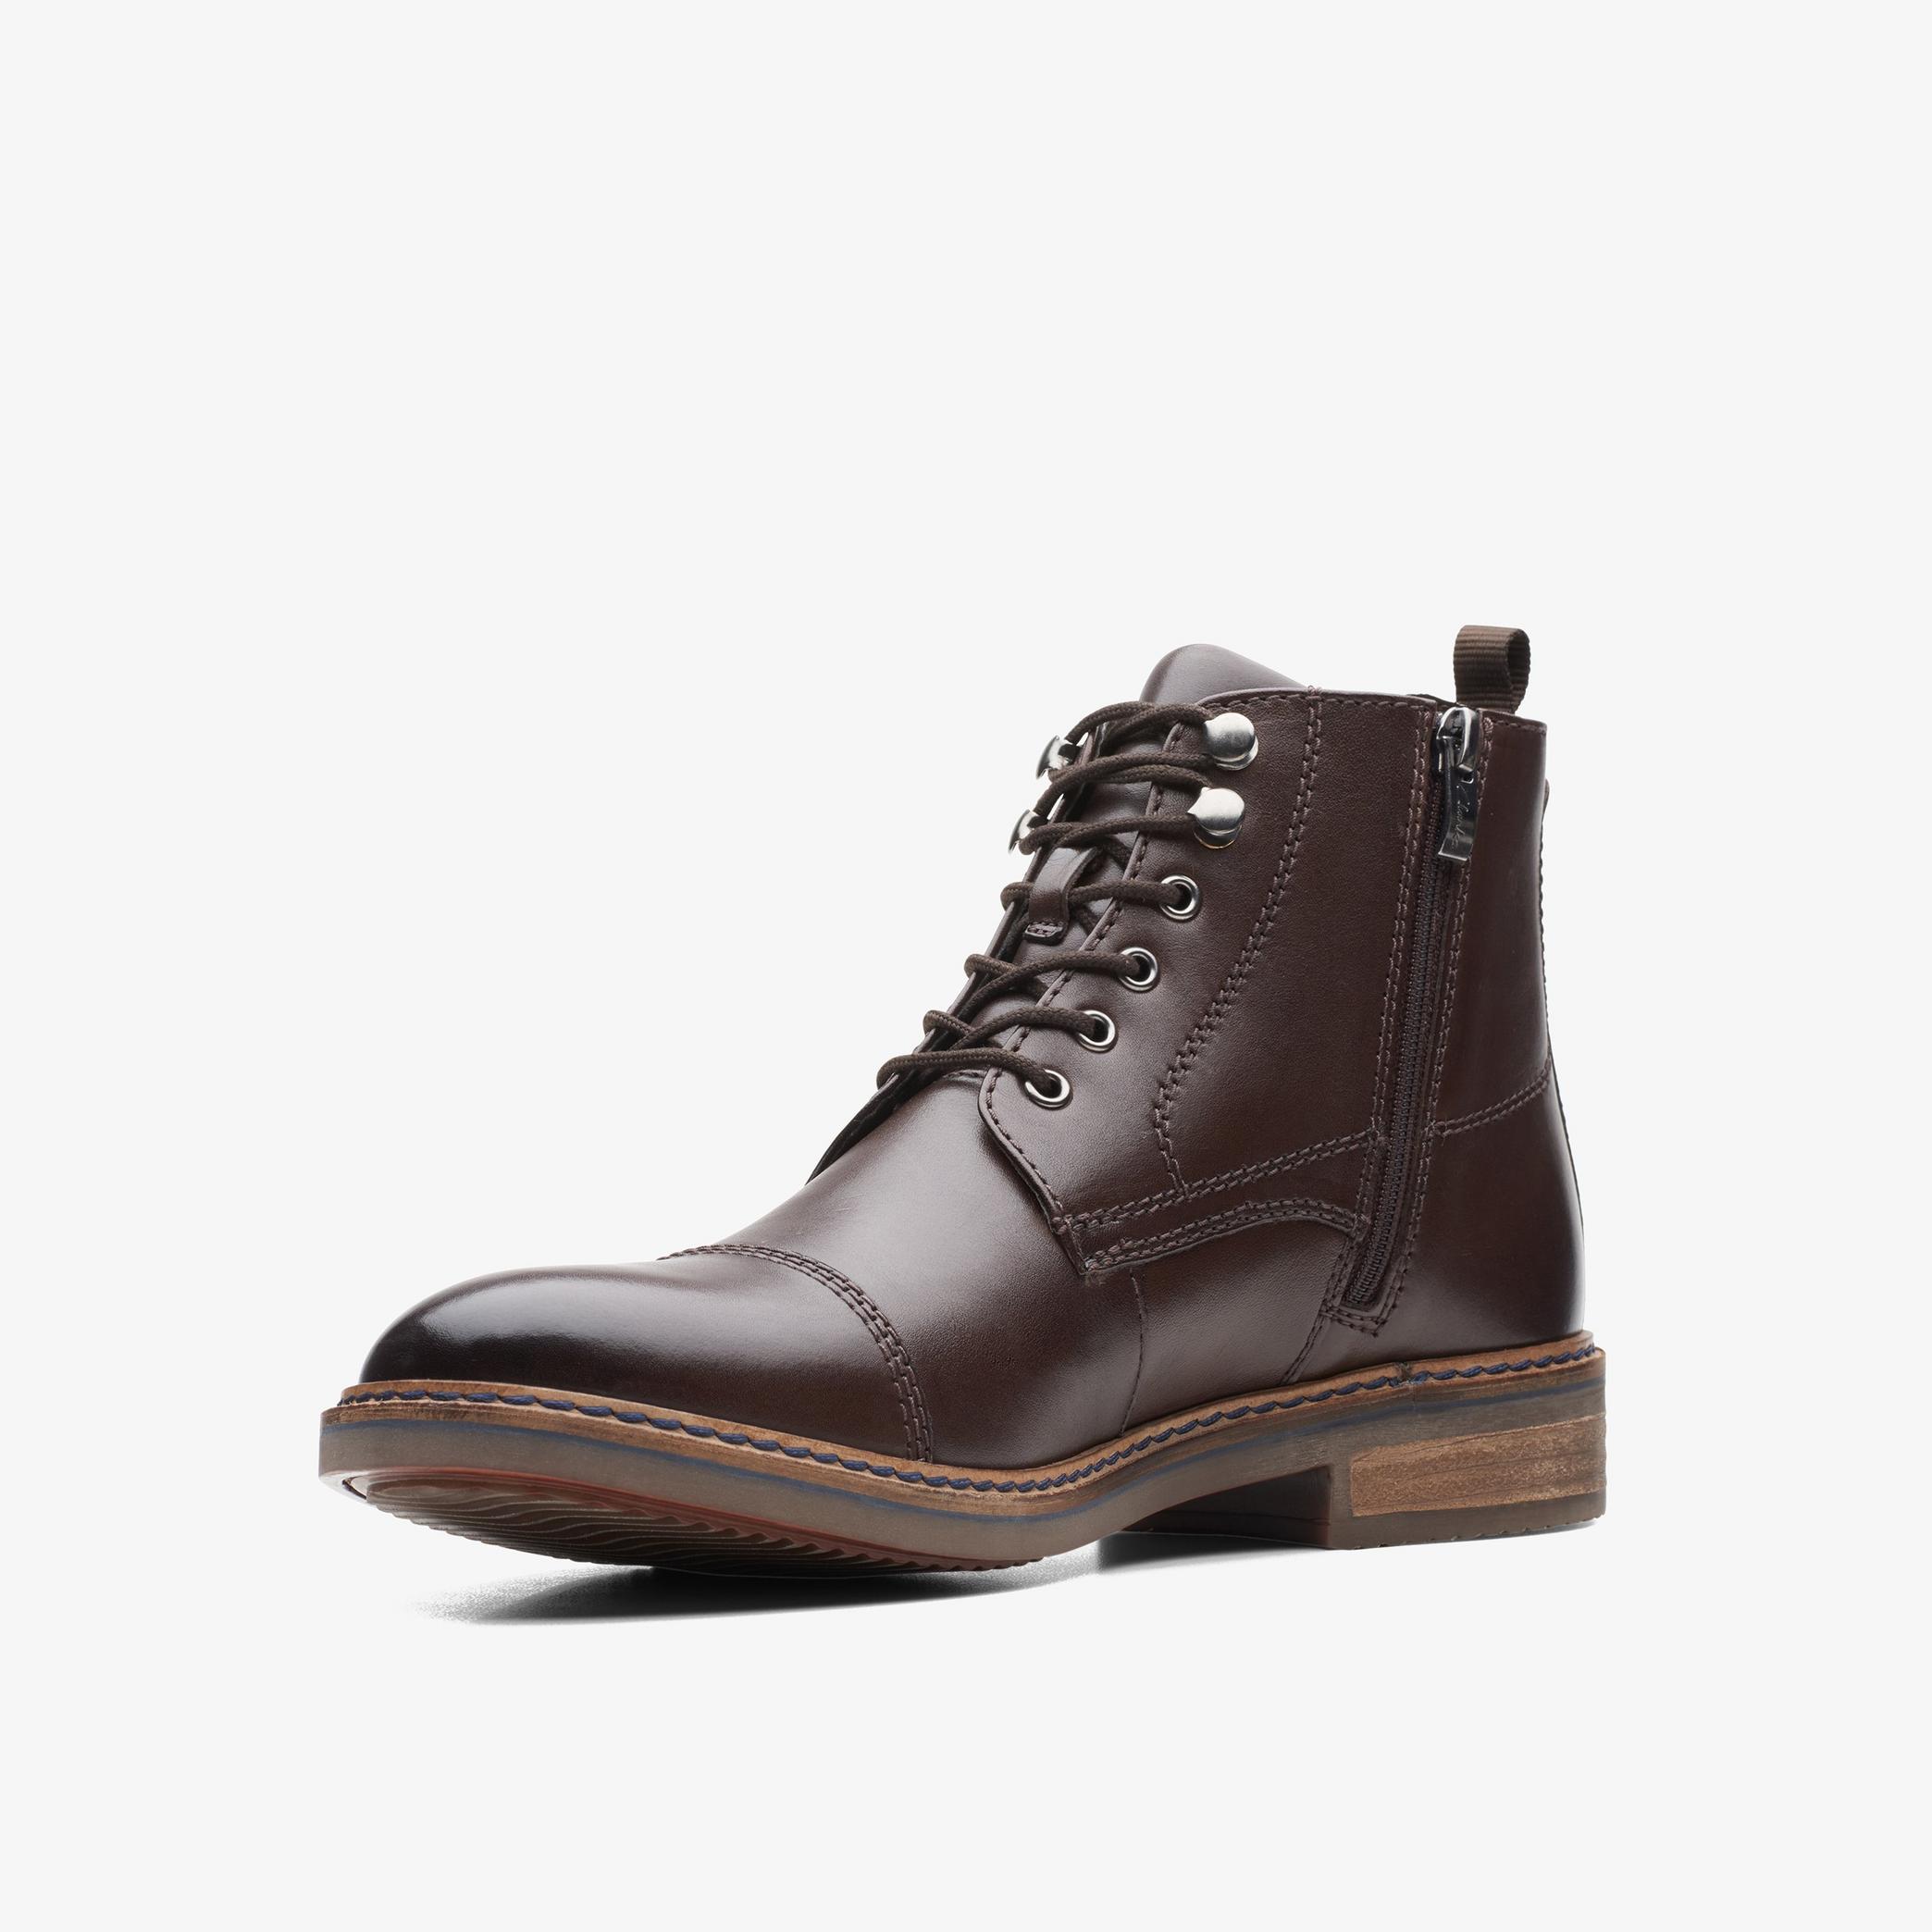 Blackford Rise Dark Brown Leather Ankle Boots, view 4 of 6